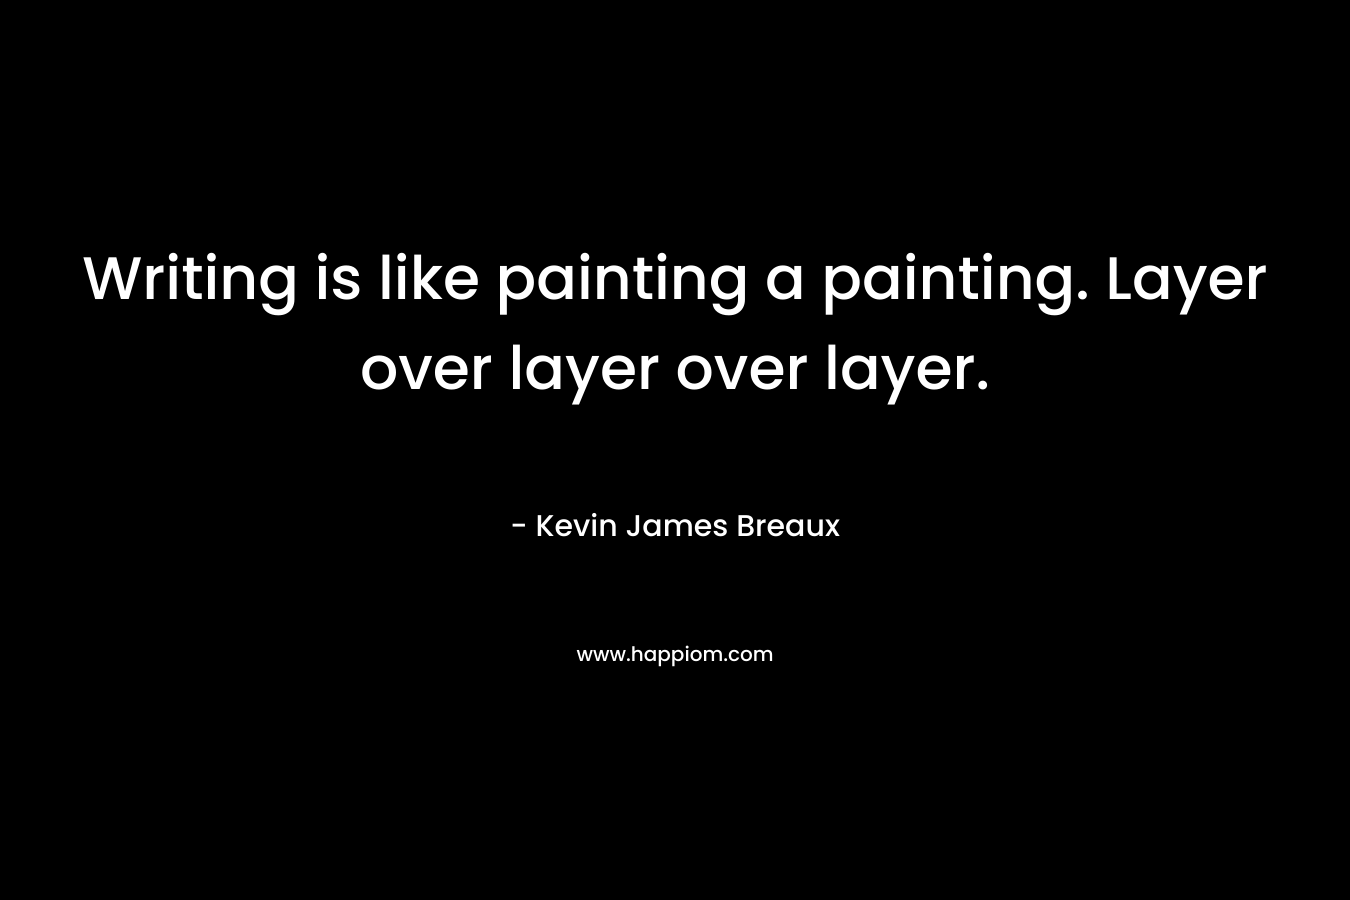 Writing is like painting a painting. Layer over layer over layer. – Kevin James Breaux